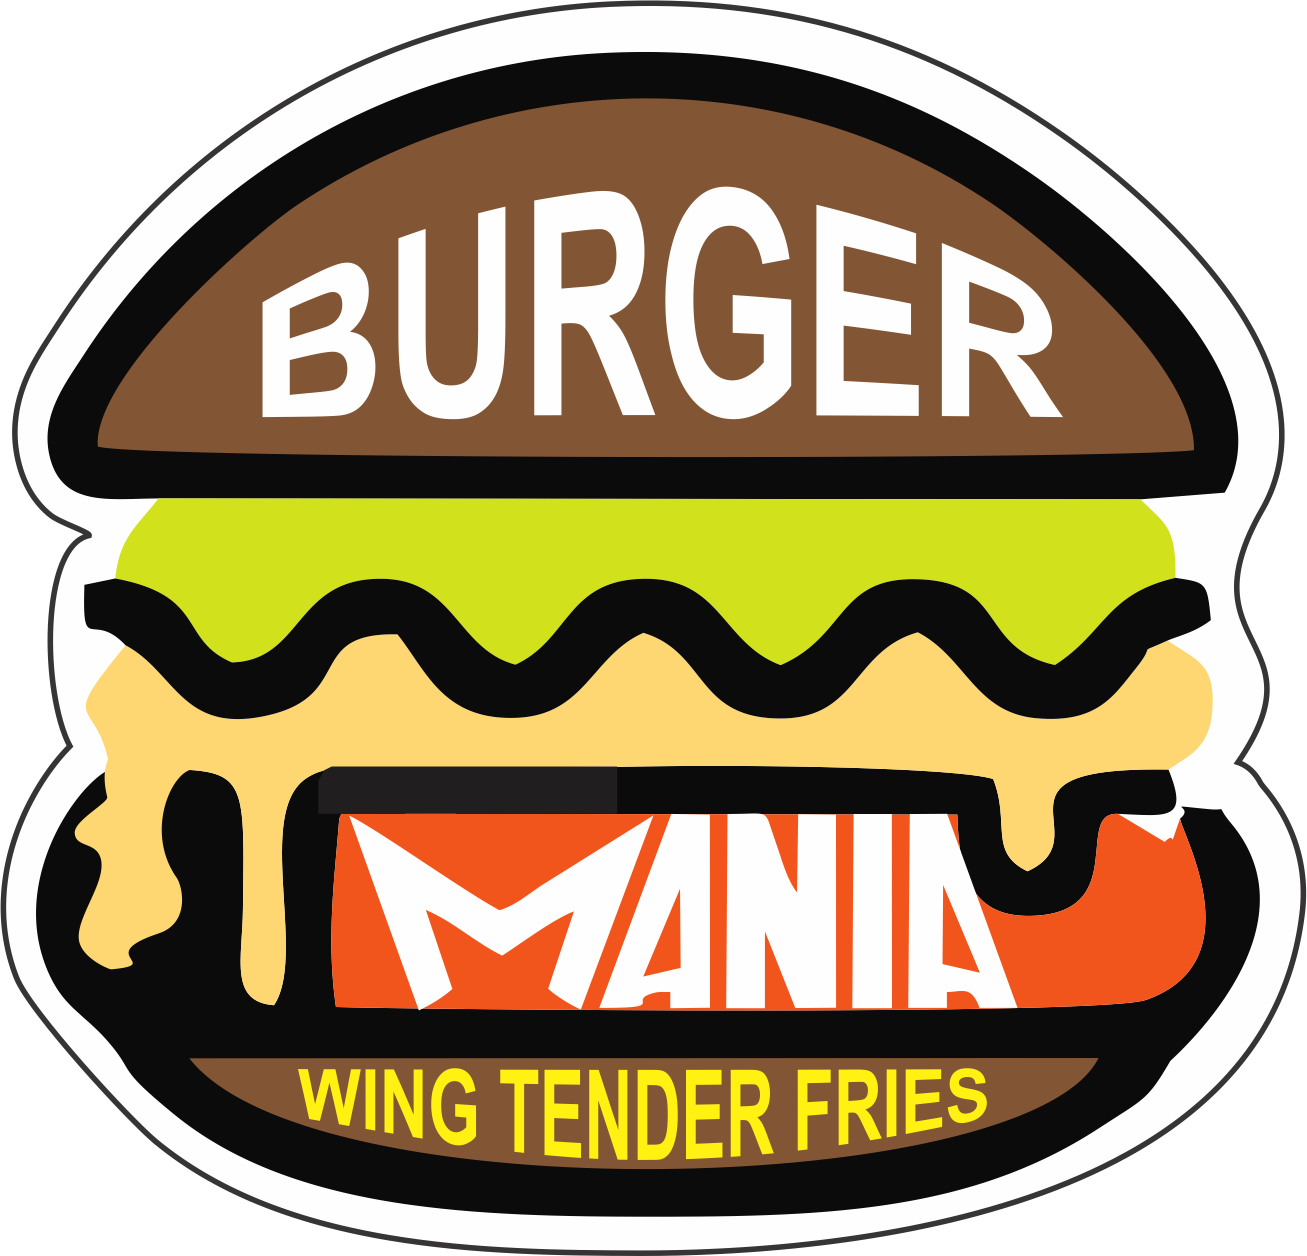 BURGERMANIA | Dont Use 274 W 40th St